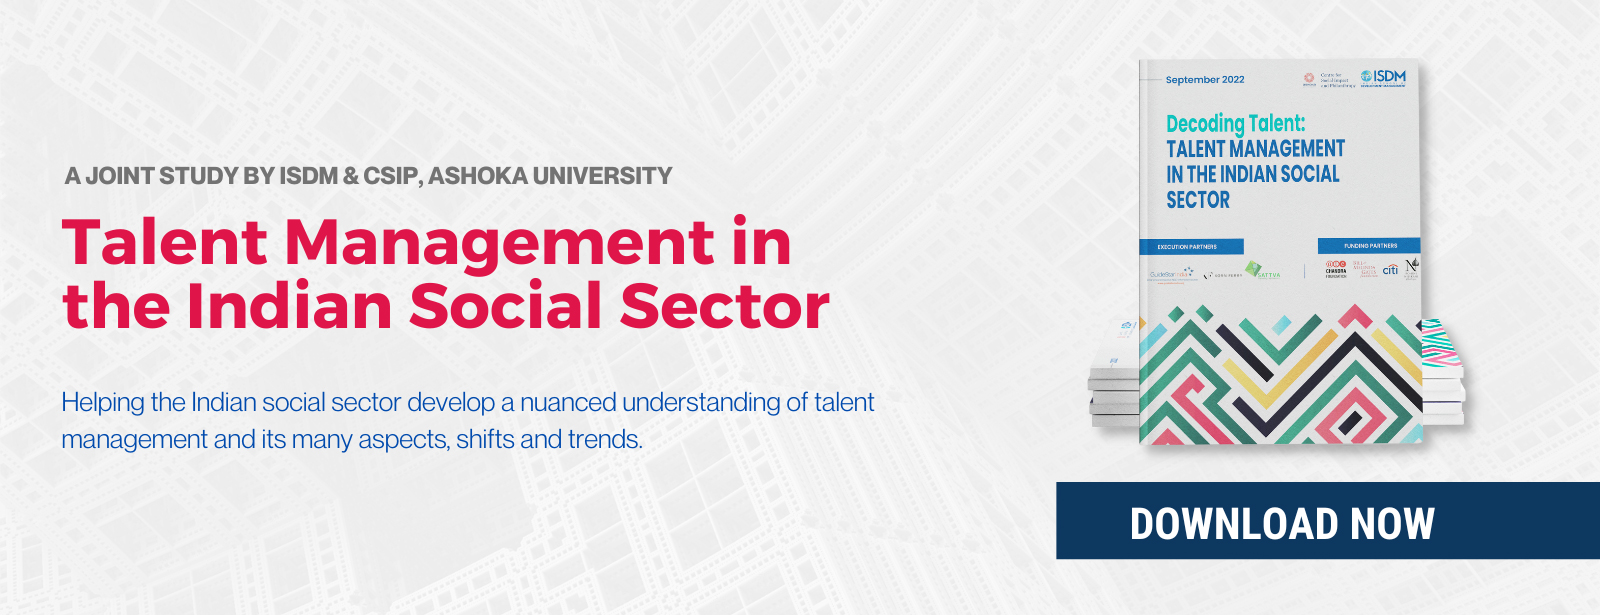 Talent Management in the Indian Social Sector: a joint study by ISDM, CSIP and Ashoka University Image